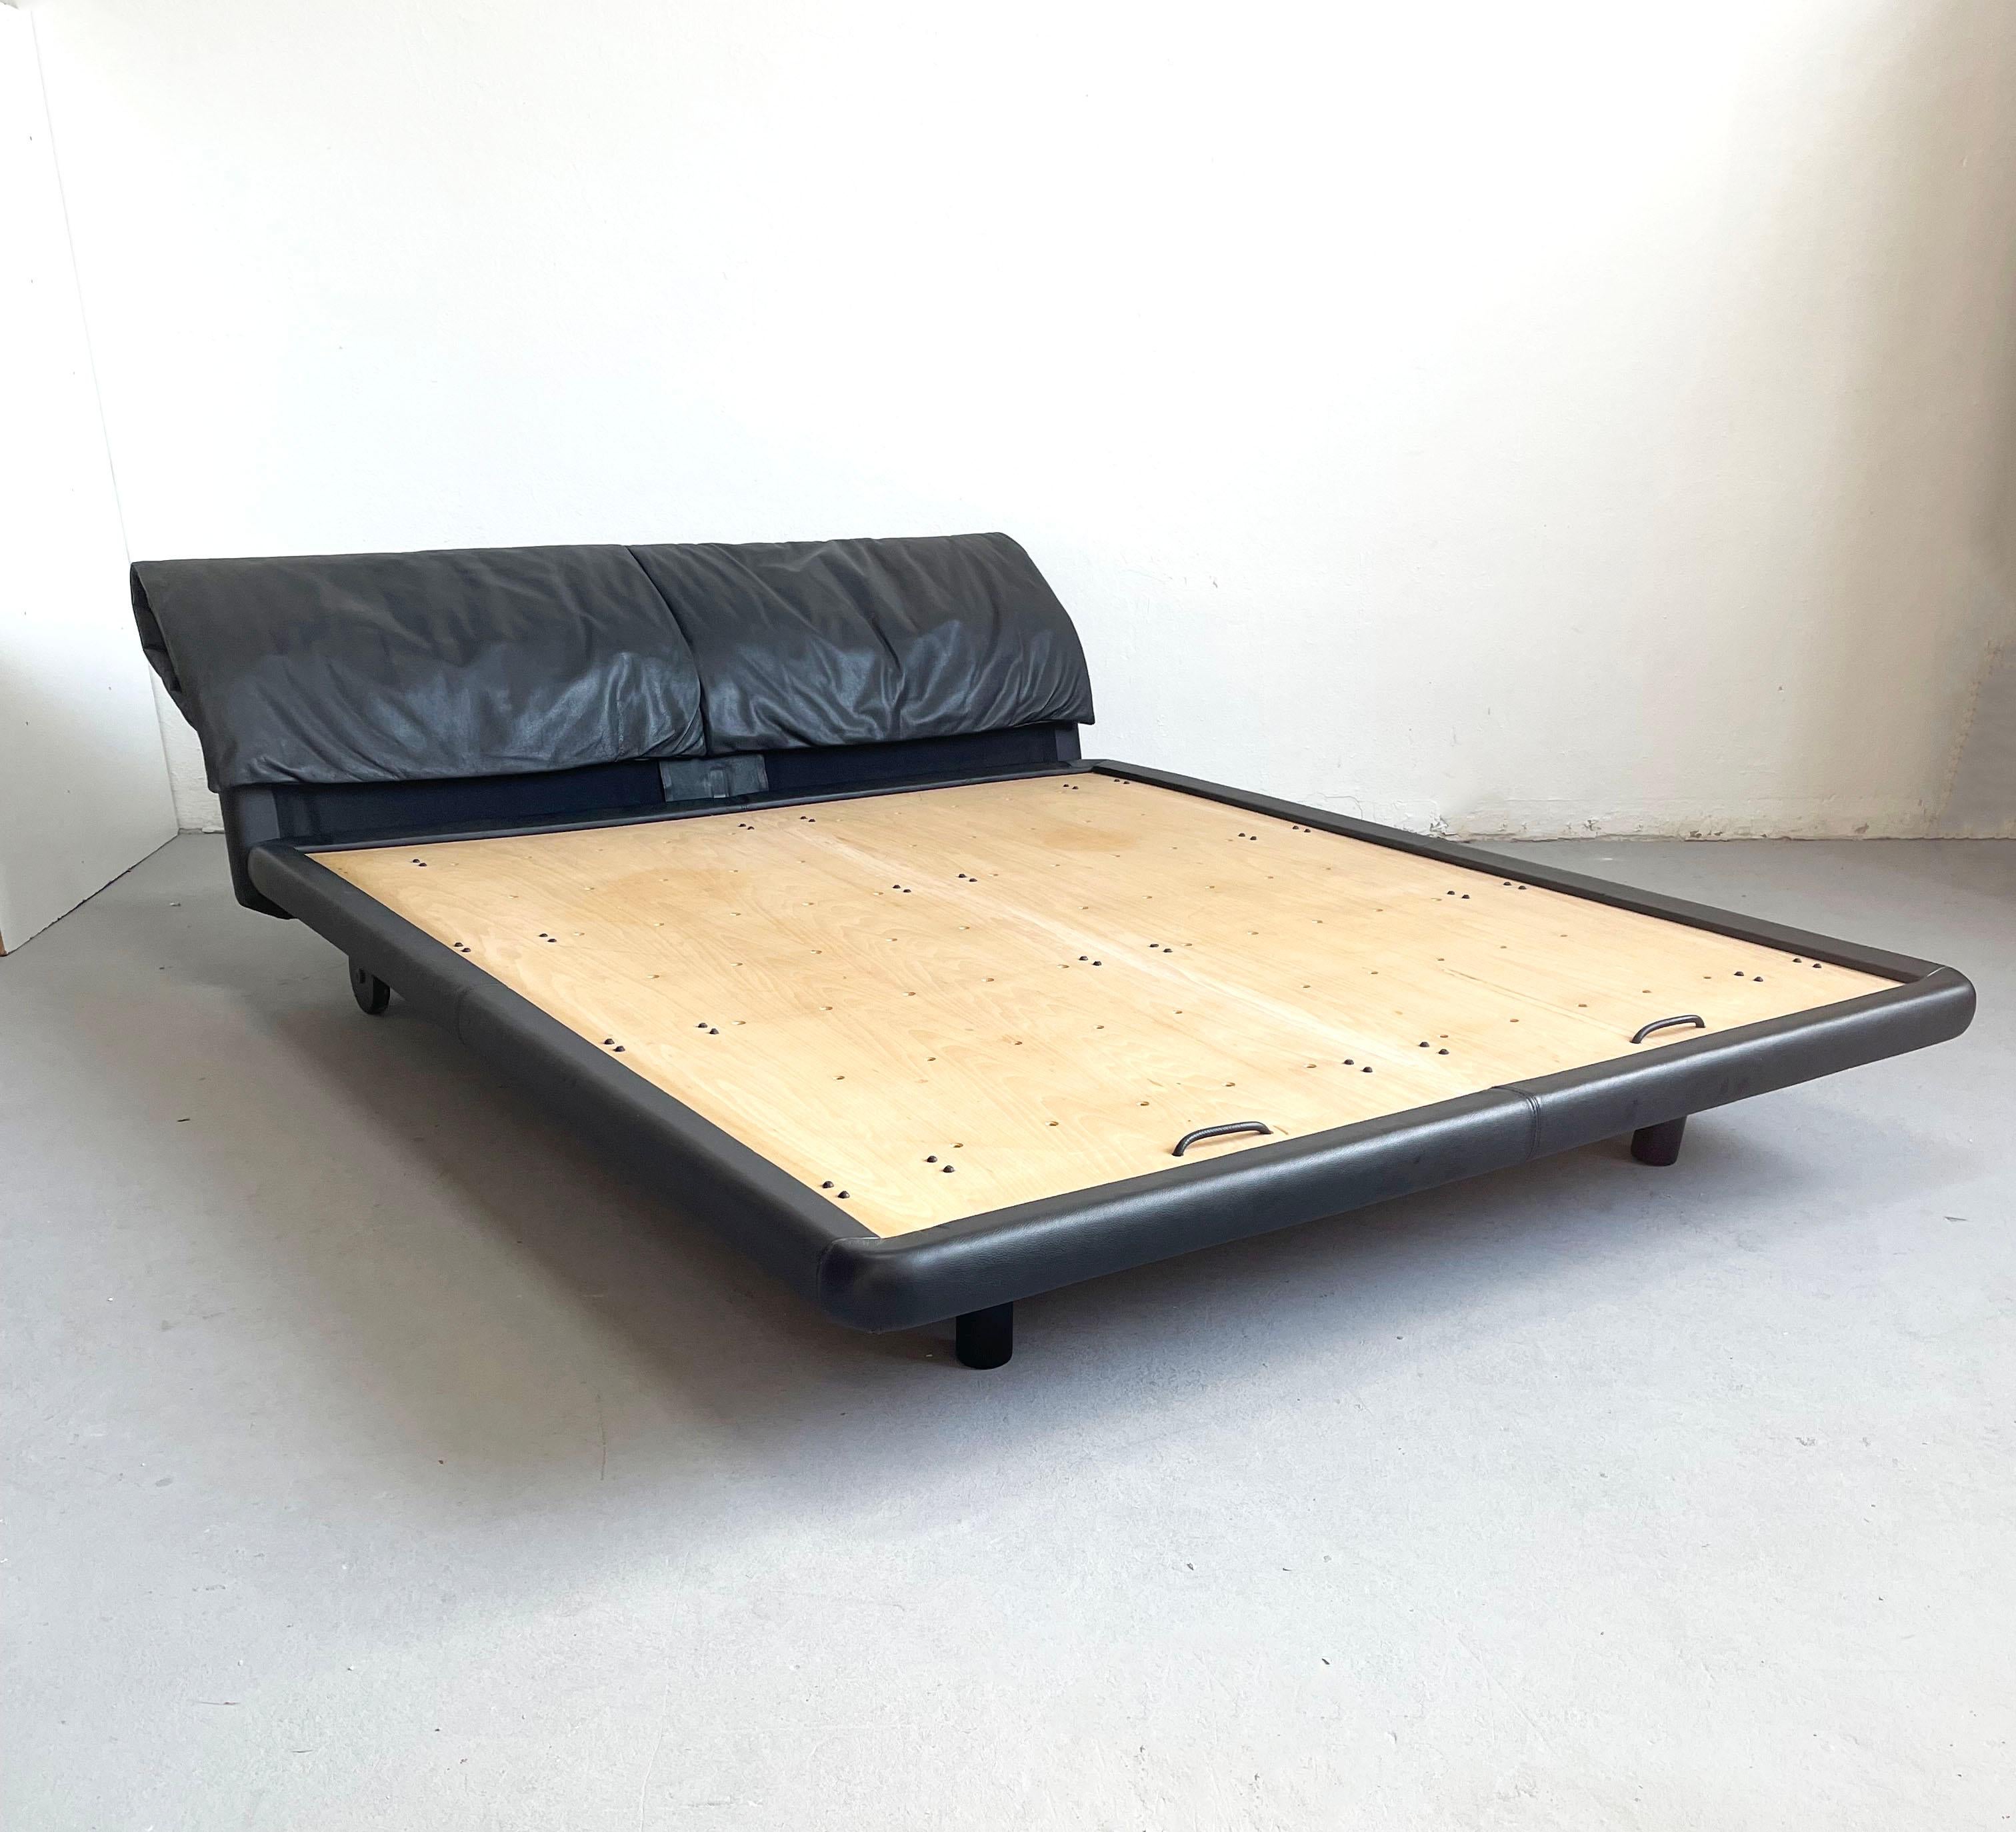 Afra & Tobia Scarpa for Molteni 'Marlo' Bed in Black Leather, Italy 1980s In Good Condition For Sale In Zagreb, HR